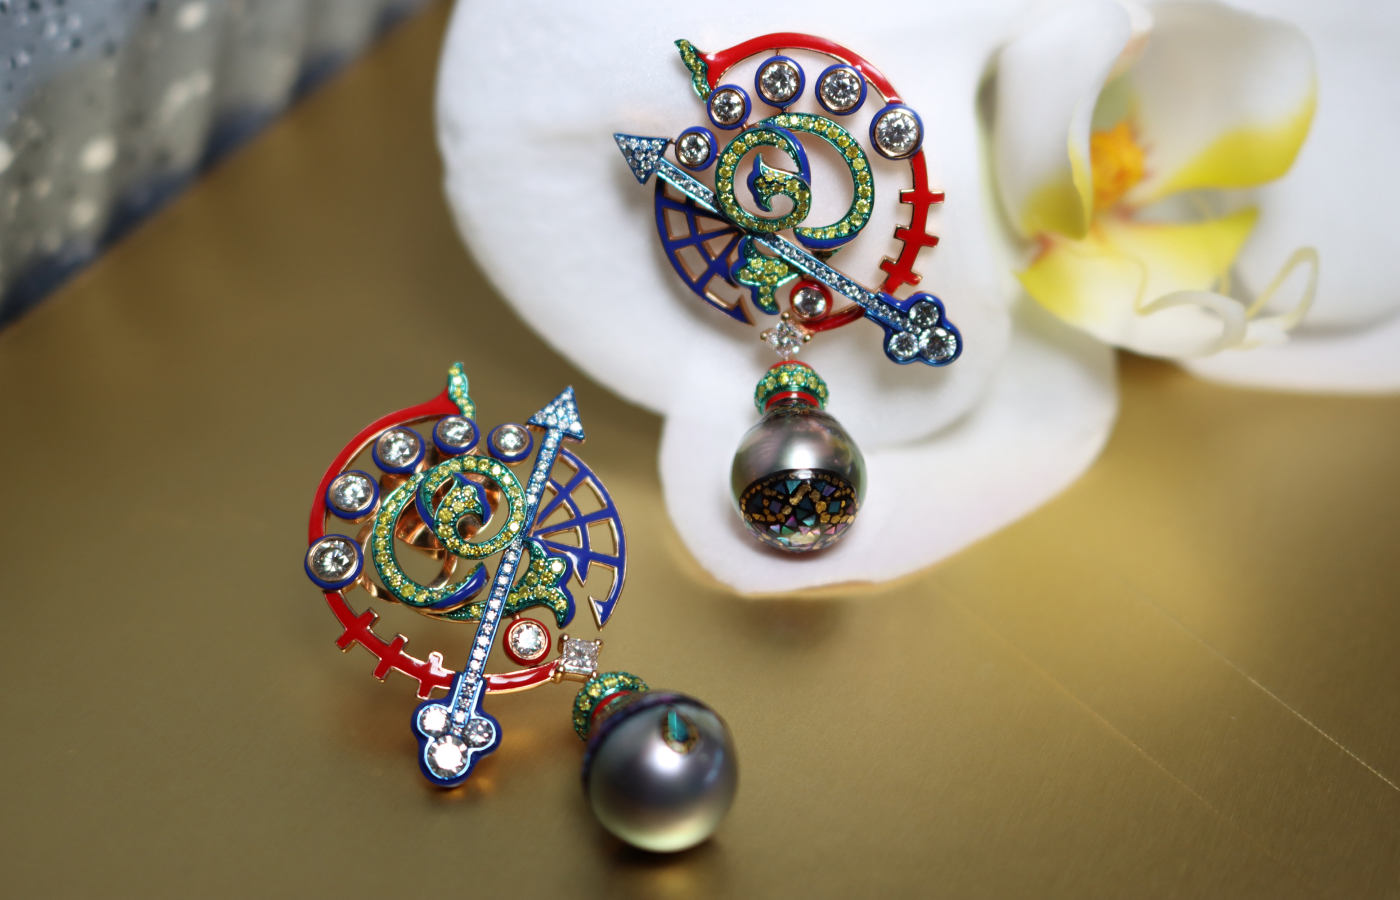 Austy Lee ‘The Wheel of Sophia’ earrings from The Gnostic Vines collection in 18K rose gold with Japanese lacquered Tahitian pearl, fancy yellow diamonds, red, blue and white enamel and white diamonds